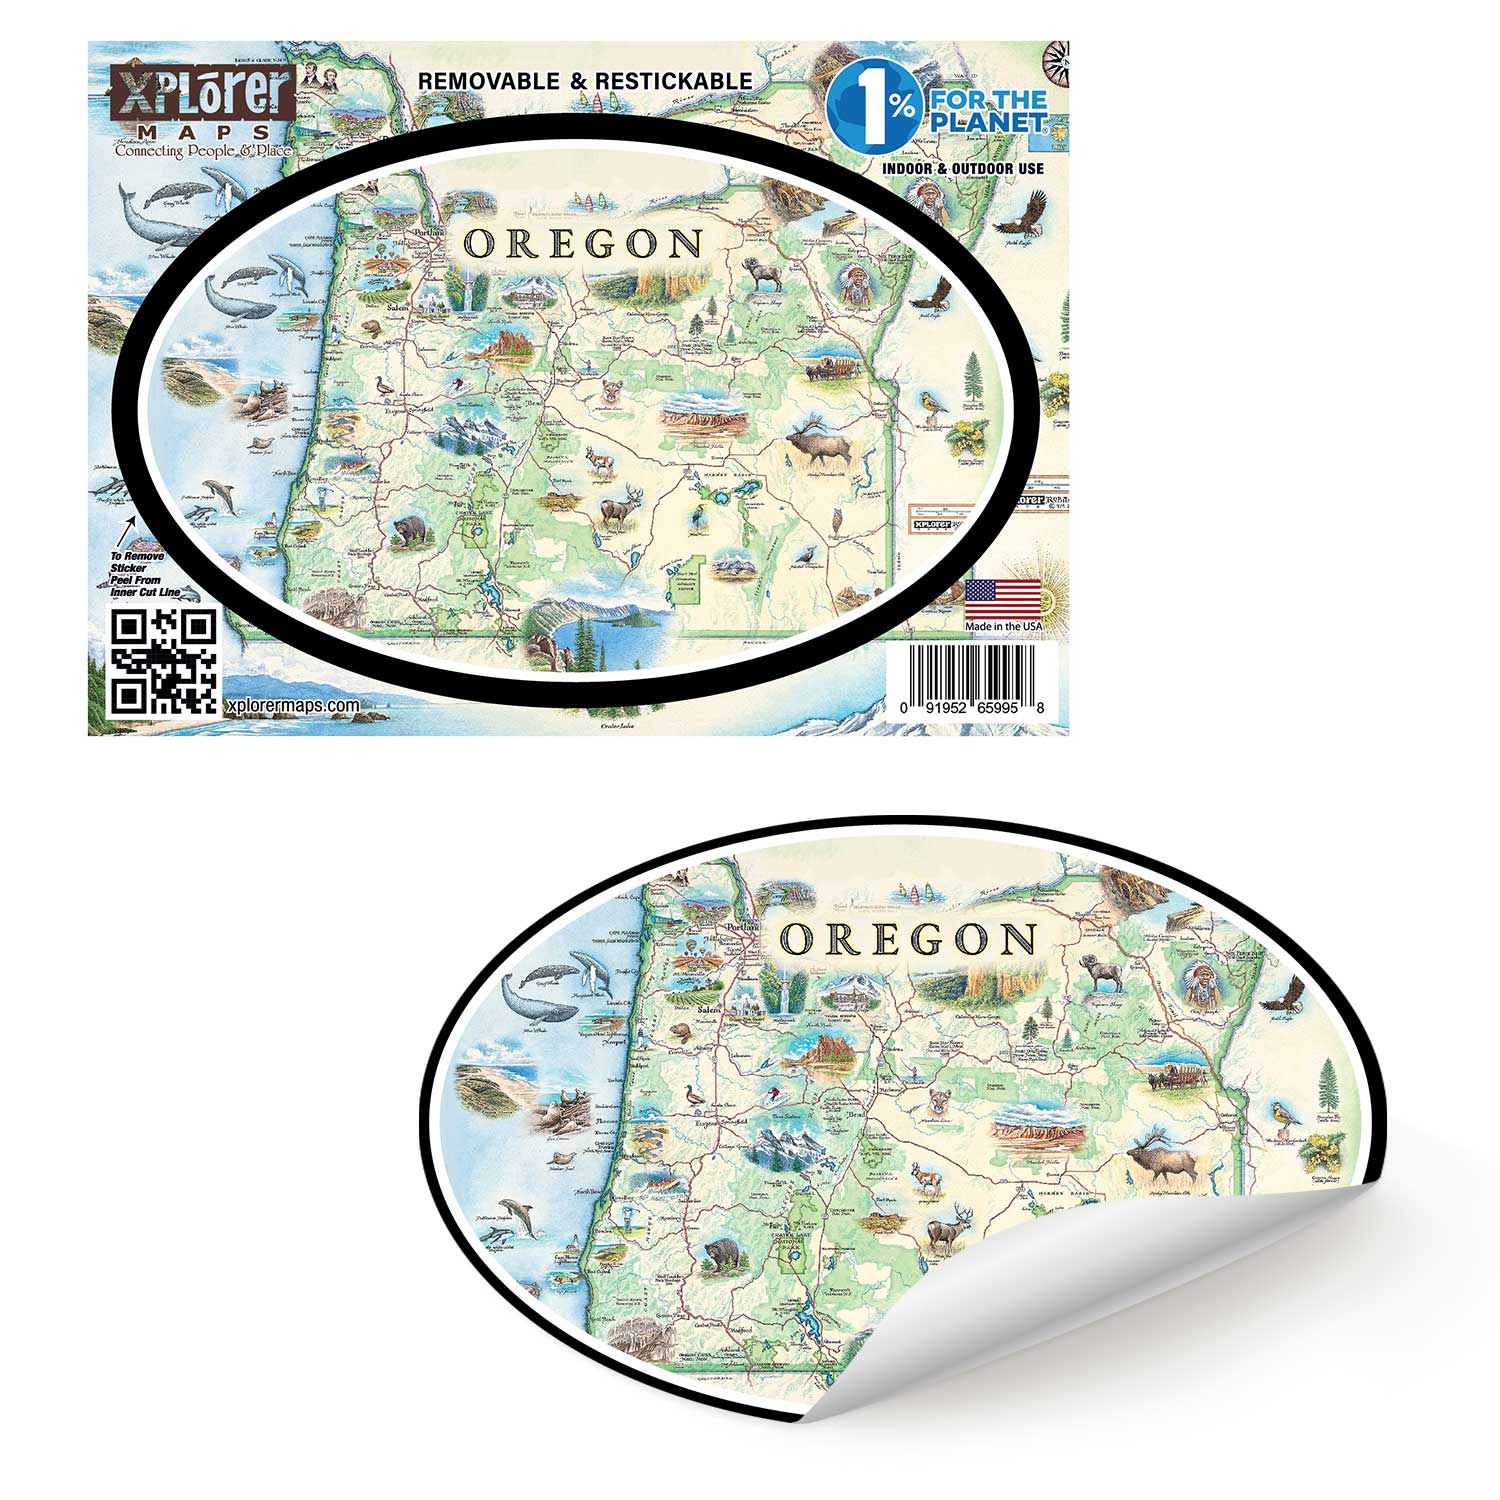 Oregon State Map Sticker by Xplorer Maps. The map features illustrations such as Hells Canyon Snake River, the Columbia River Gorge, Multnomah Falls, and Crater Lake. Flora and fauna include blue whales, big horn sheep, Dungeness crab, Oregon grape, and Douglas Fir. Some cities depicted are Portland, Hood River, Cannon Beach, and Seaside. 